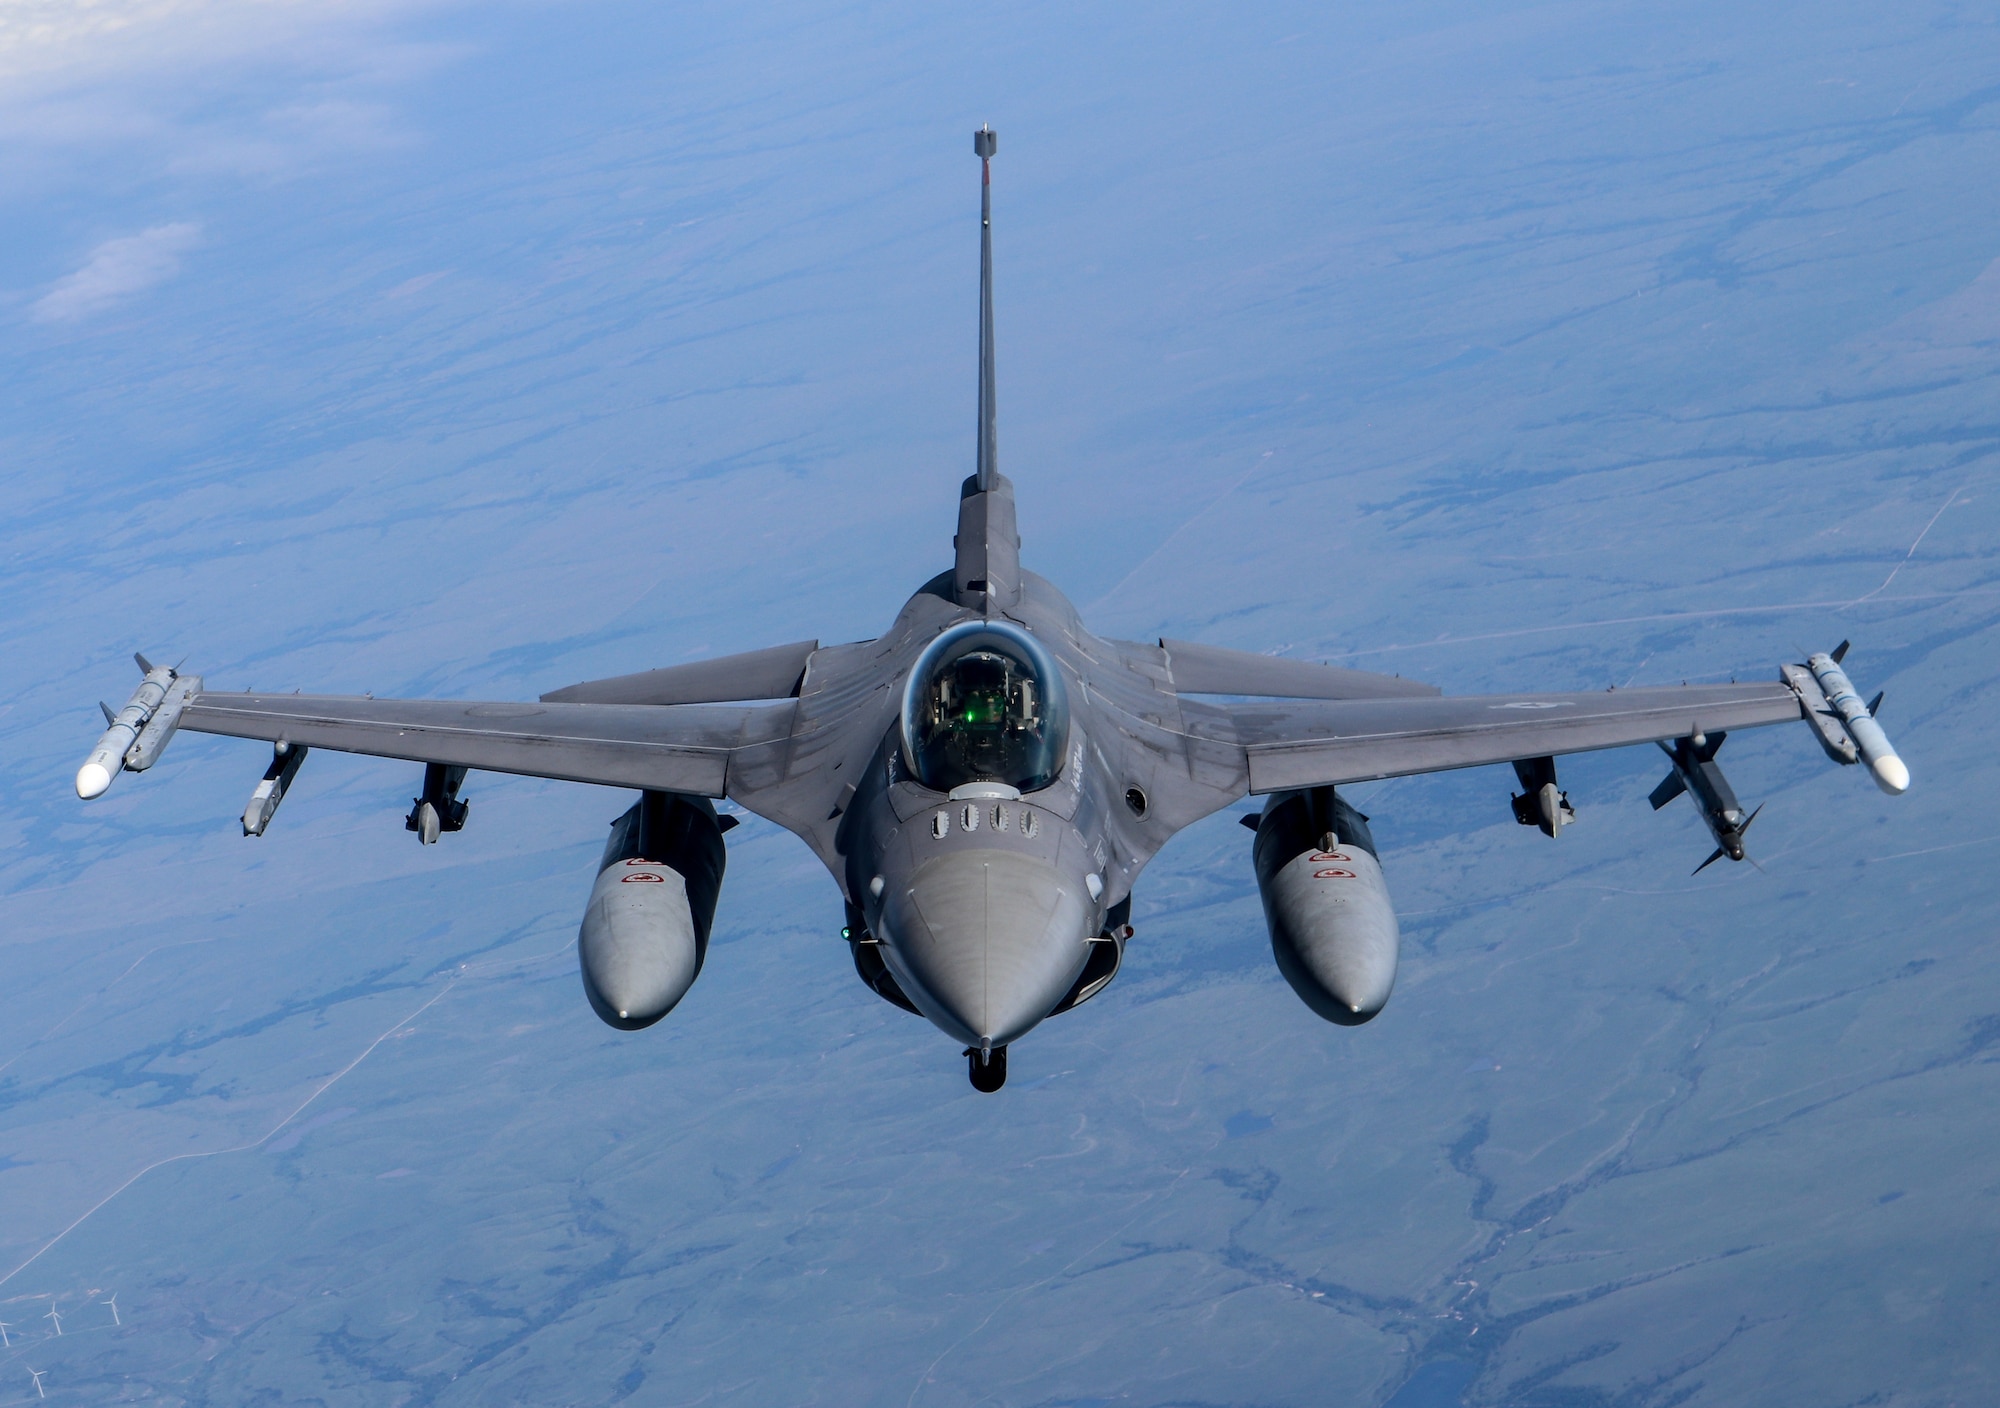 A 138th Fighter Wing F-16 Fighting Falcon flies behind a 507th Air Refueling Wing KC-135R Statotanker during a congressional orientation flight, Aug. 15, 2019, at Tinker Air Force Base, Oklahoma. The Okies shared the Reserve mission and a unique experience with the congressional delegation. (U.S. Air Force photo by Senior Airman Mary Begy)